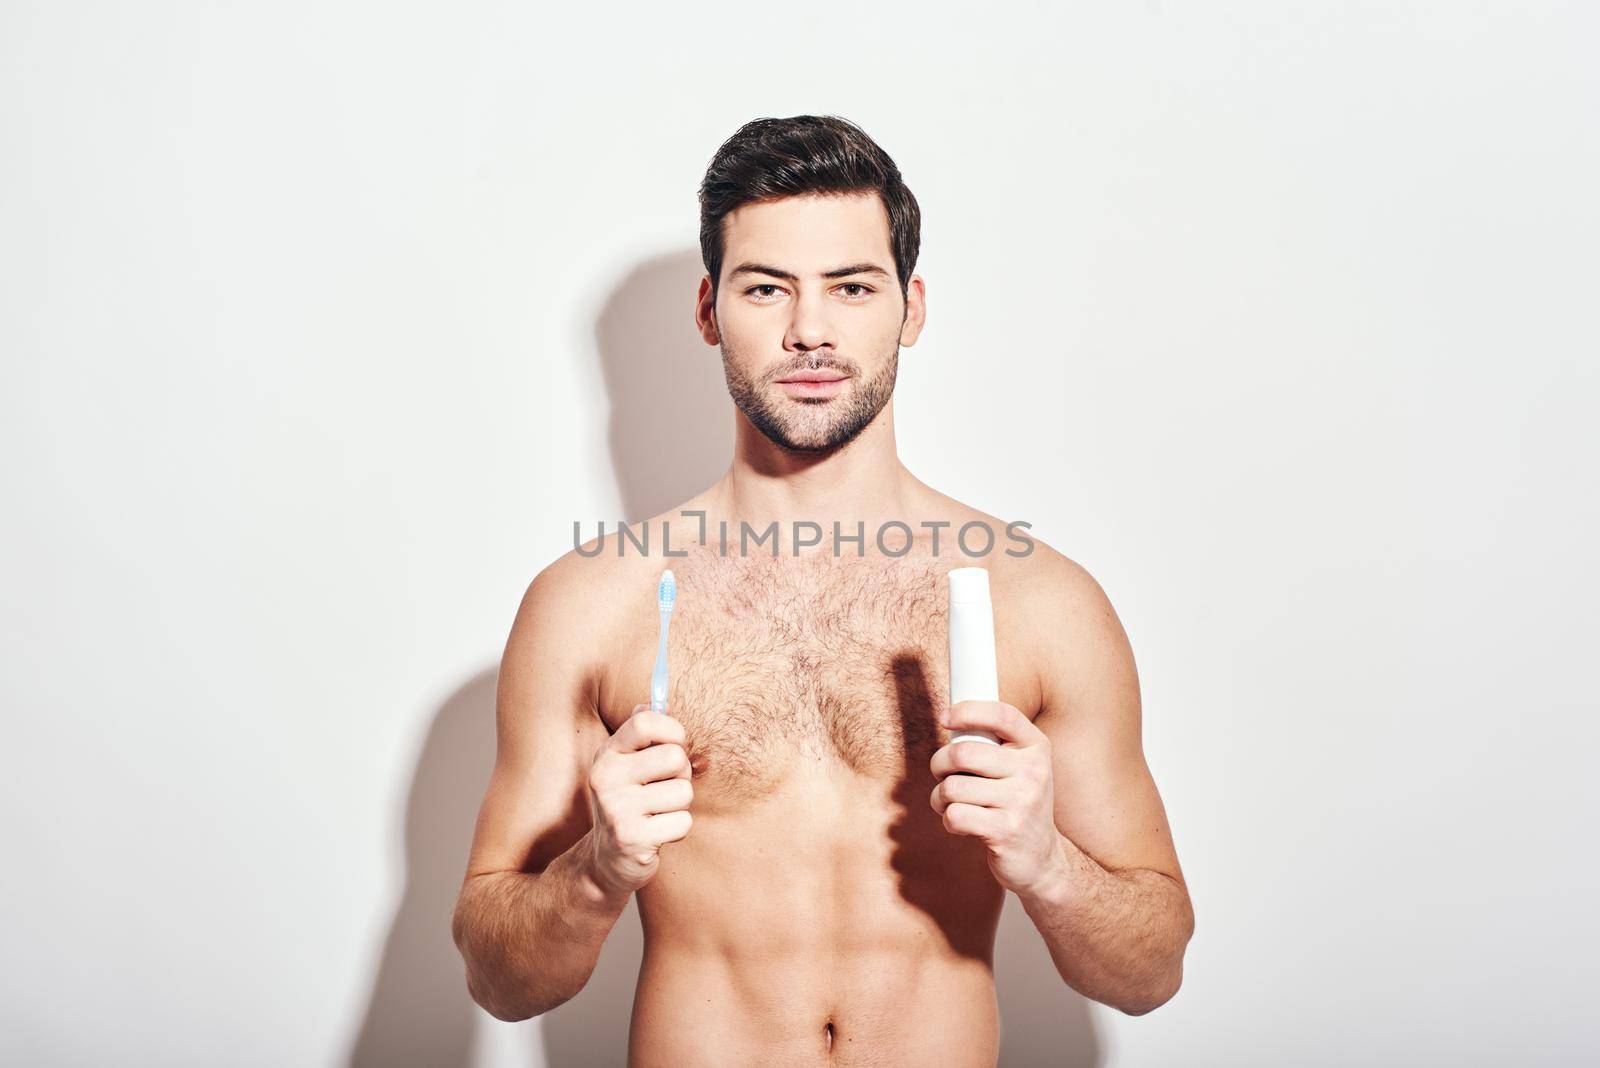 Take care of your teeth. Handsome dark-haired man holding toothpaste and toothbrush, standing shirtless isolated over white background, looking at camera by friendsstock